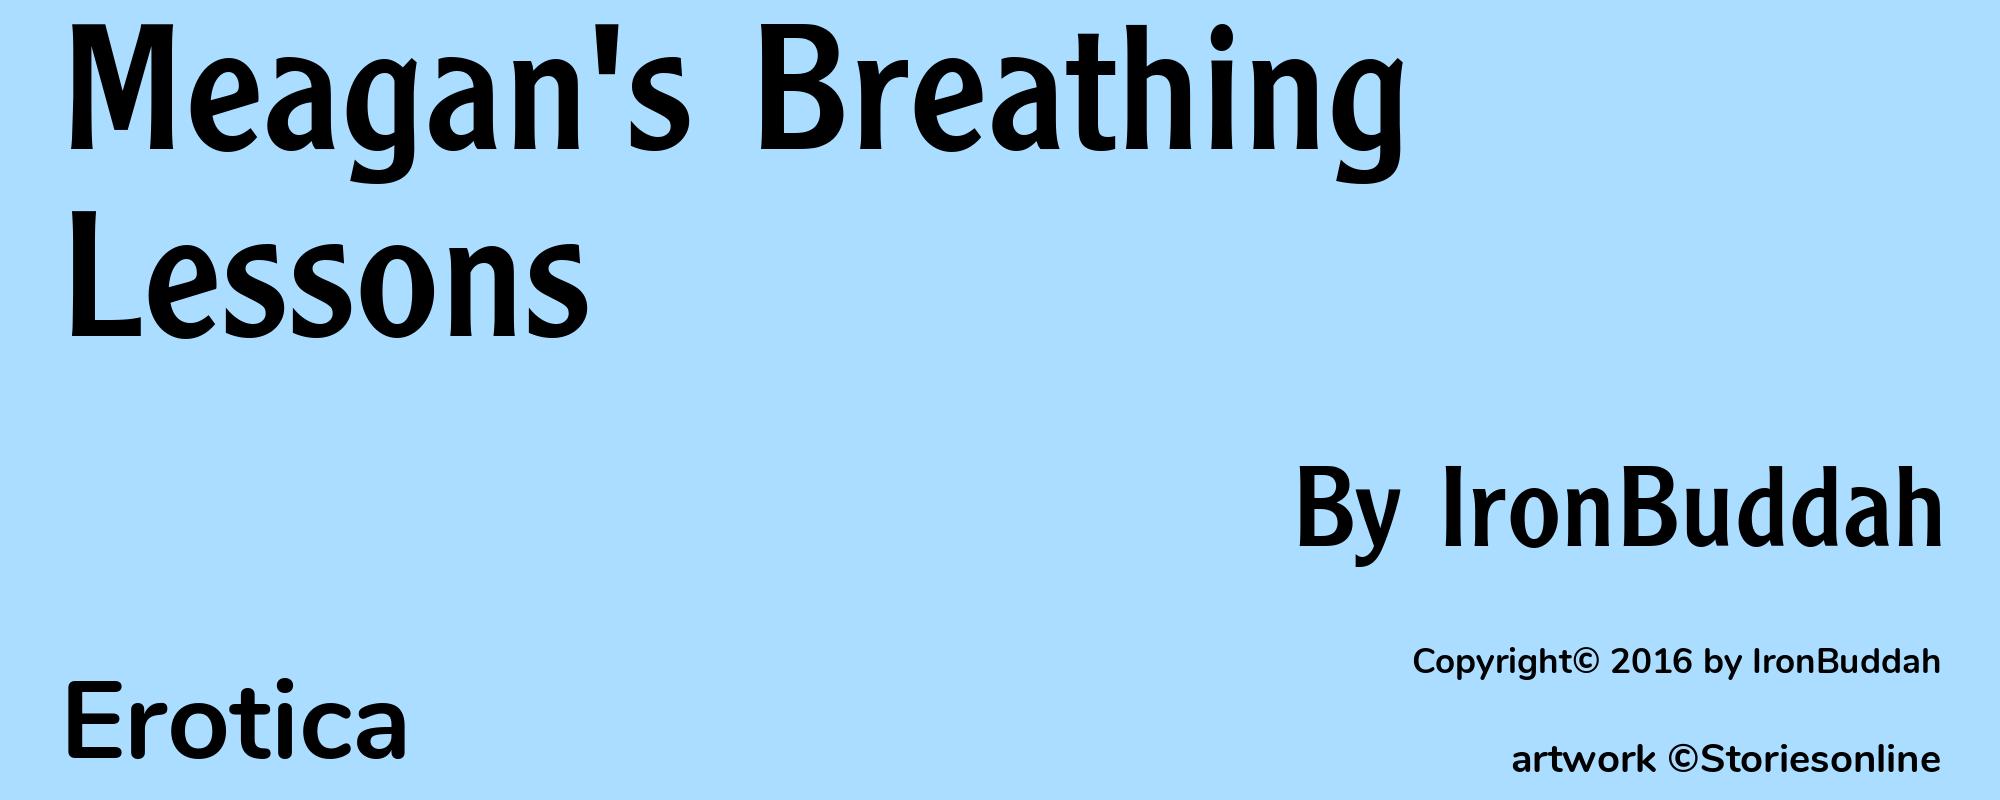 Meagan's Breathing Lessons - Cover